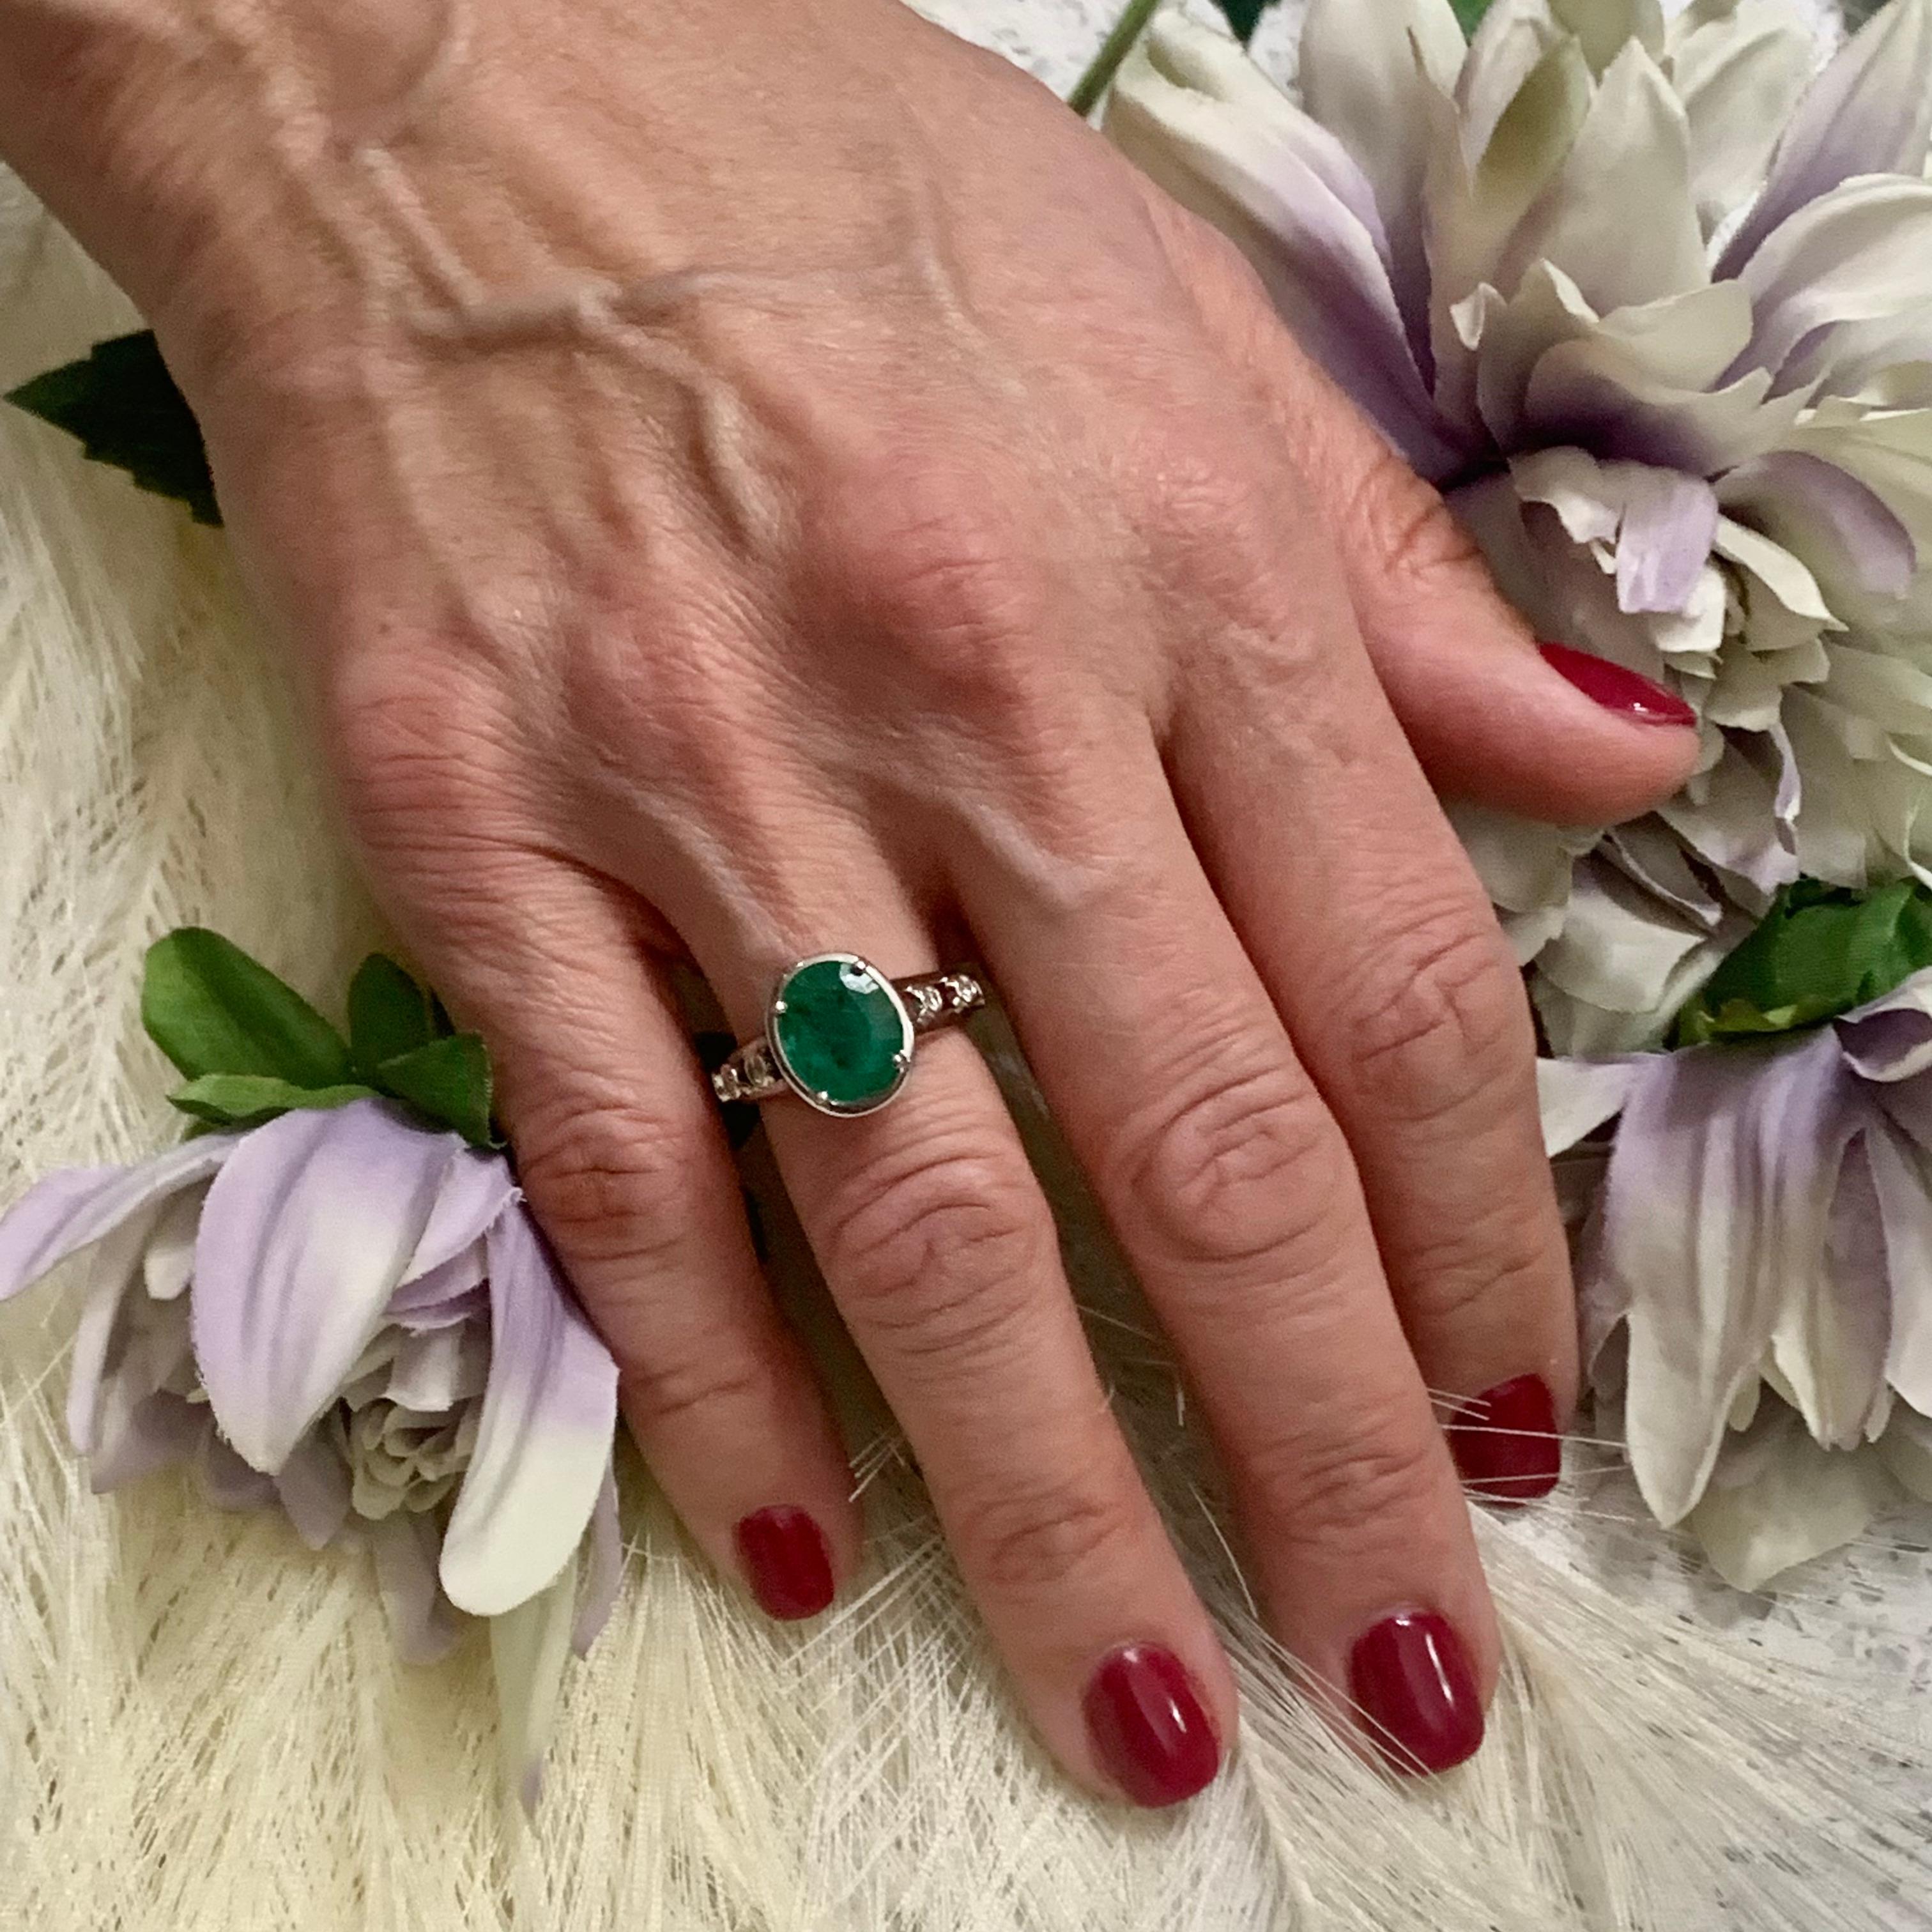 Natural Finely Faceted Quality Emerald Diamond Statement Ring 4.05 TCW 14k Gold Women Certified $3,950 913623

This is a Unique Custom Made Glamorous Piece of Jewelry!

Nothing says, “I Love you” more than Diamonds and Pearls!

This Emerald ring has